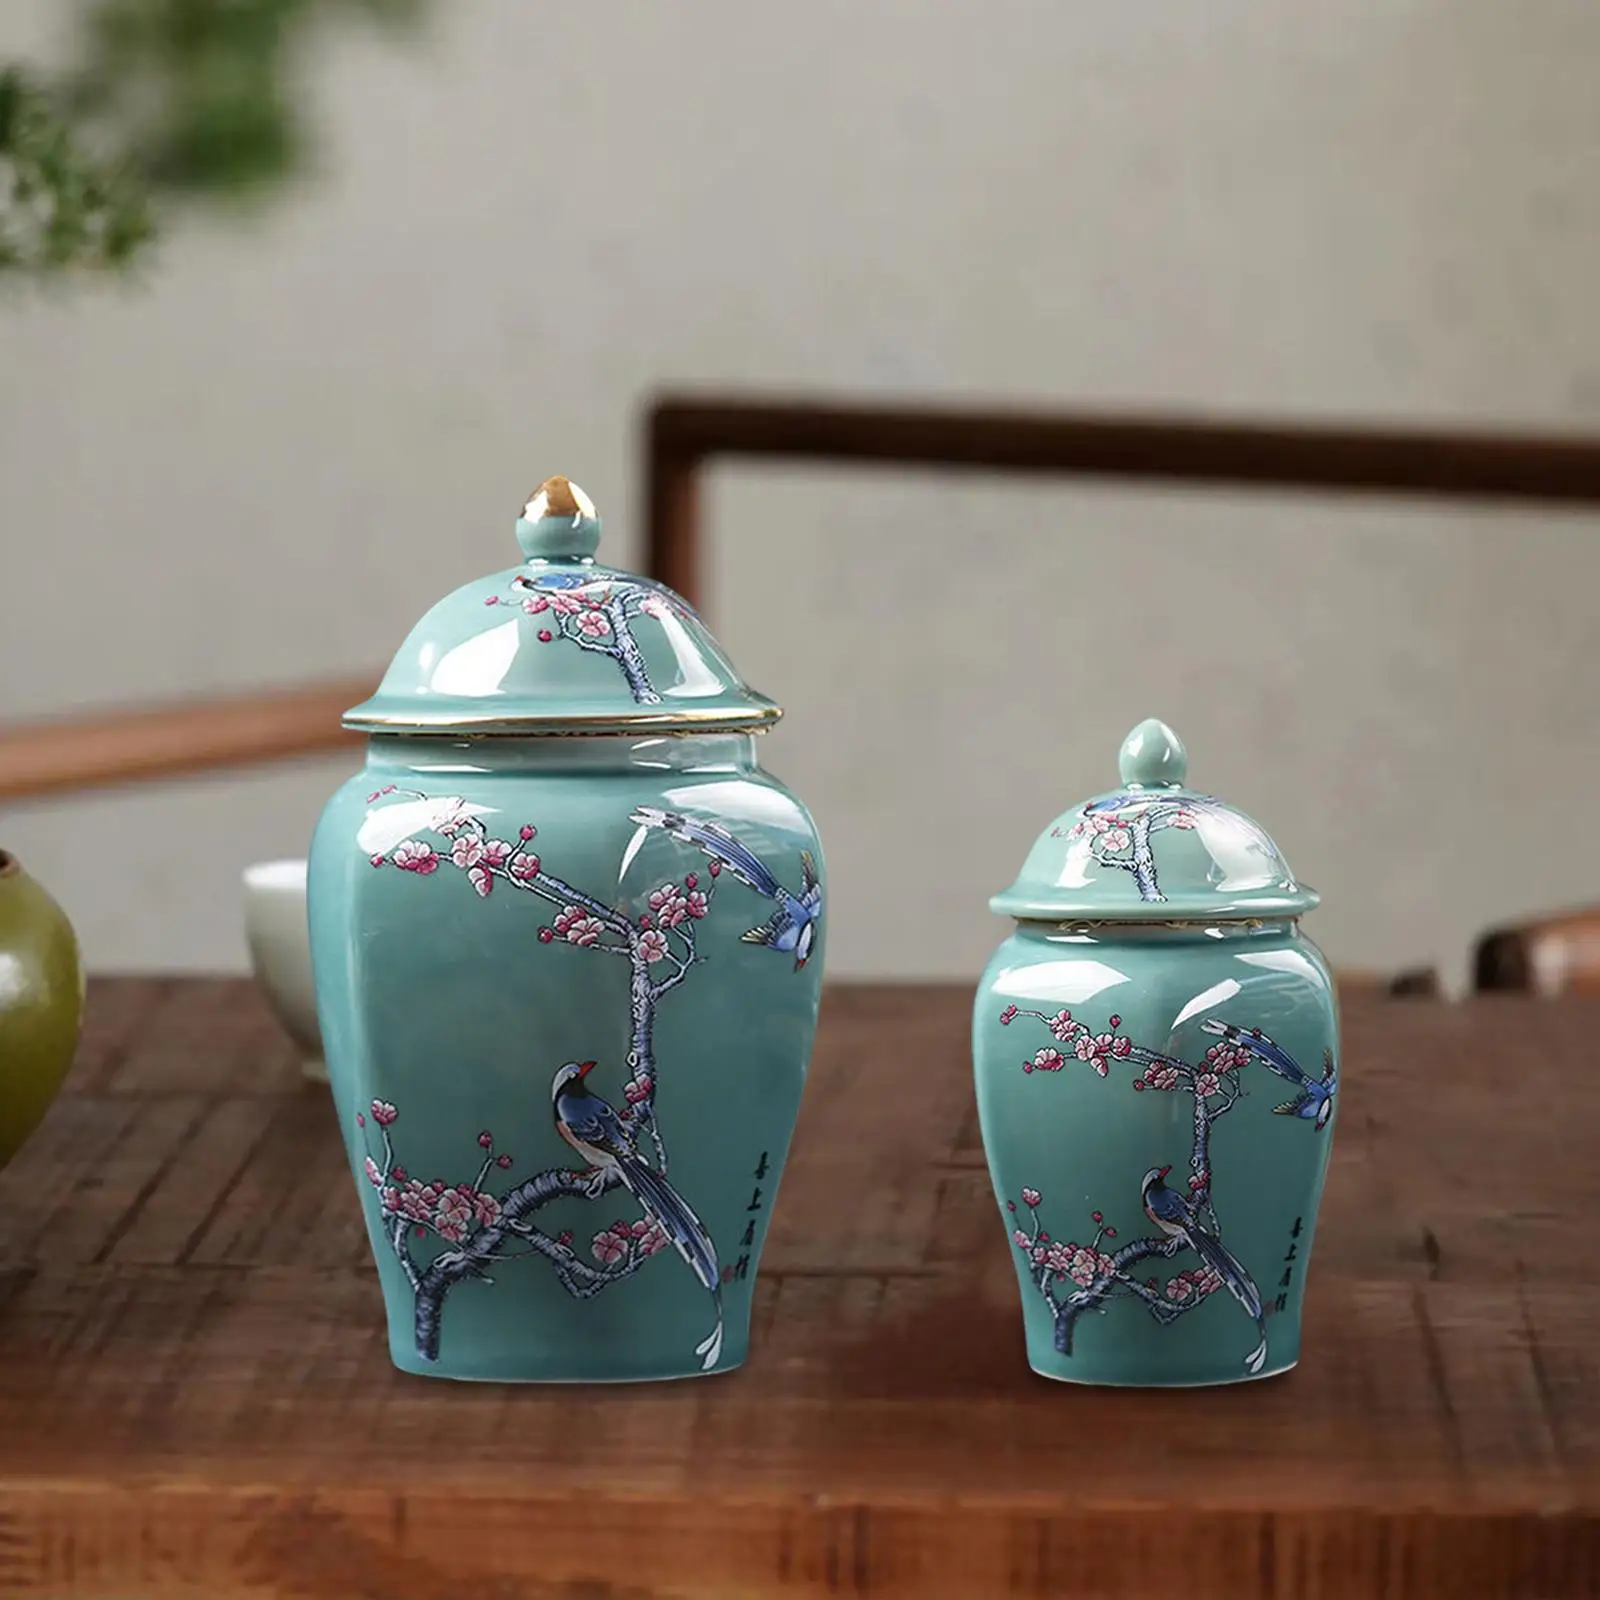 Classical Ceramic Ginger Jar Tea Canister Flower Pot with Lid Table Centerpiece Gift Holder Vase for Kitchen Parties Decoration